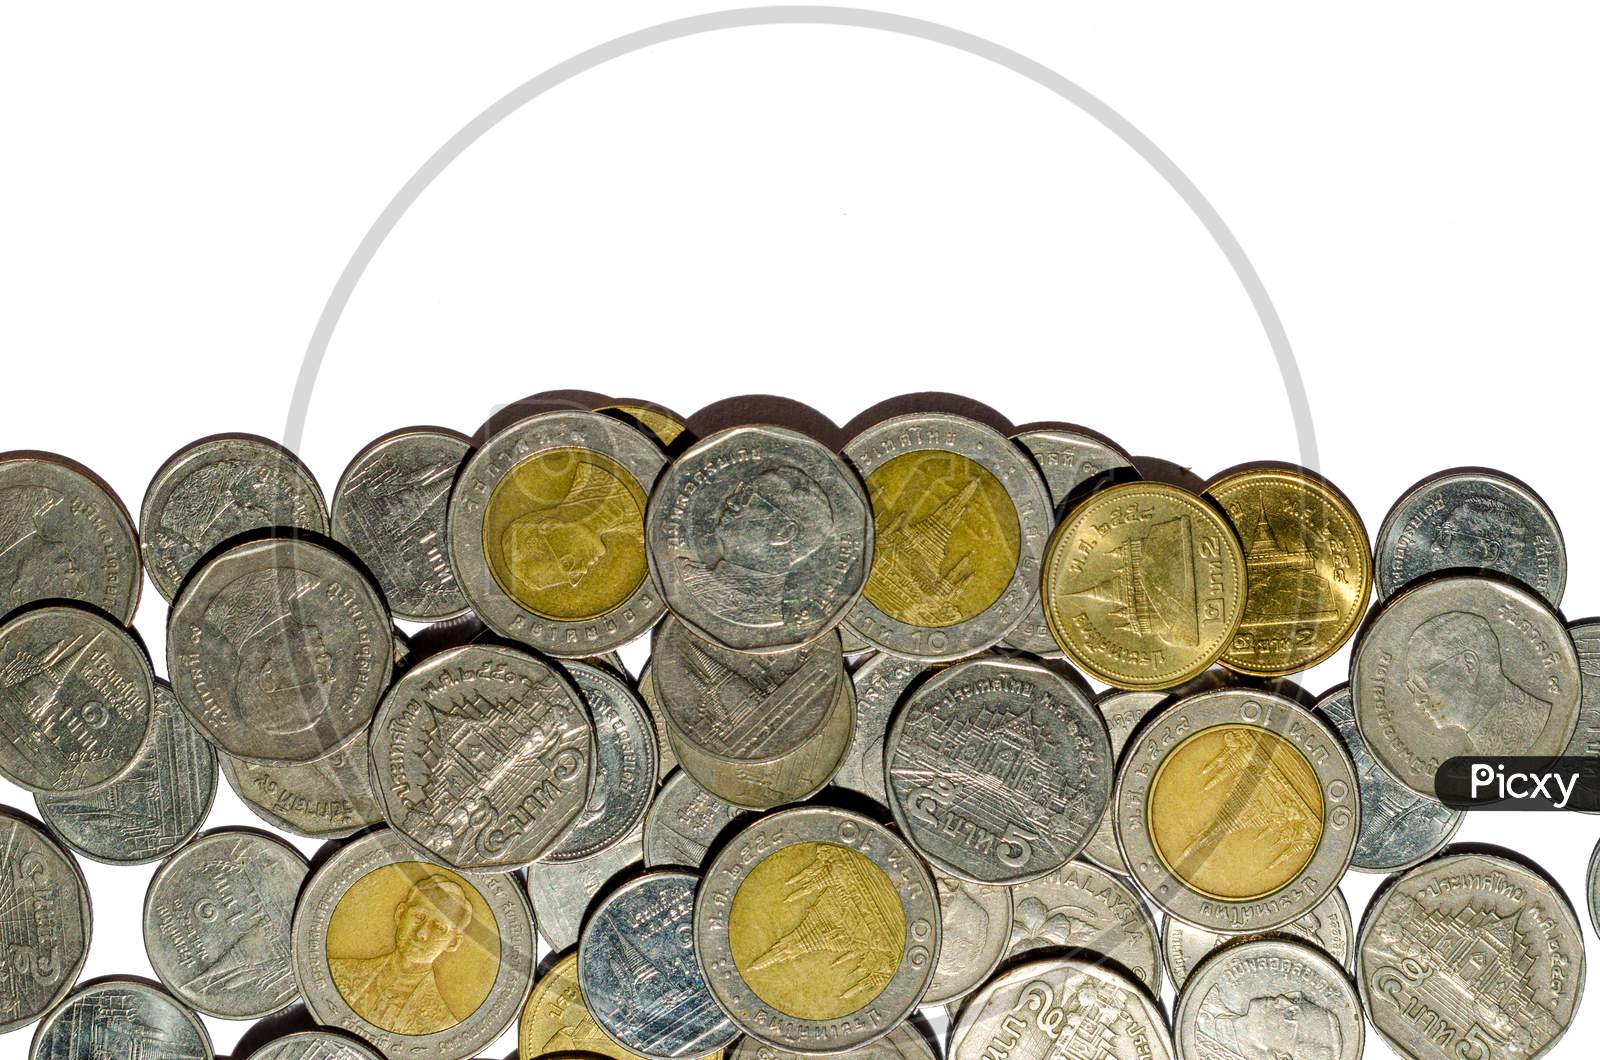 Money, Coin, Rising Silver And Gold Thai Baht Coins Charts With Reflection Isolated On White Background, Coin Stacks On A White Background